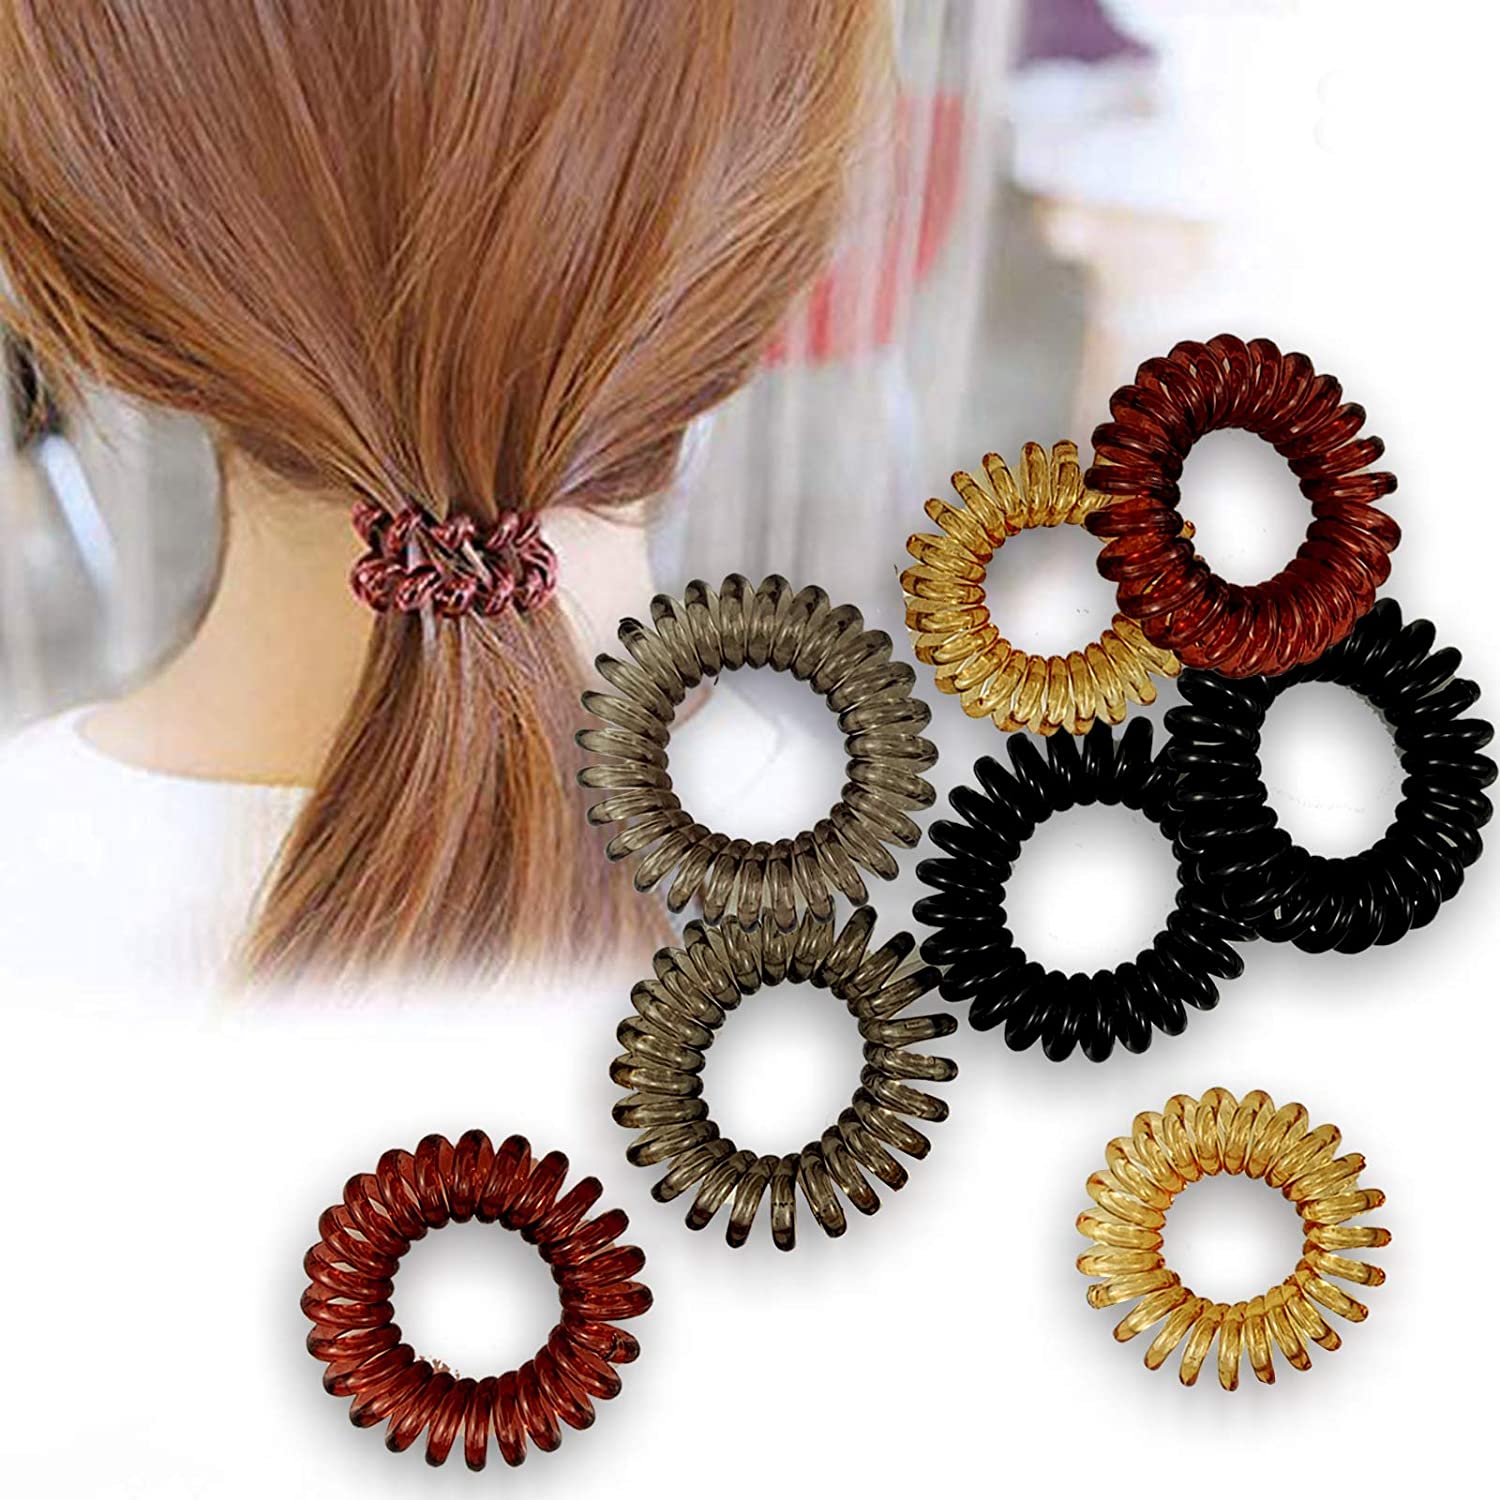 Spiral Hair Ties (8 Pieces), Coil Hair Ties for Thick Hair, Ponytail Holder Hair Ties for Women (four Colors), No Crease Hair Ties, Phone Cord Hair Ties for all Hair Types with Plastic Spiral. - image 5 of 7